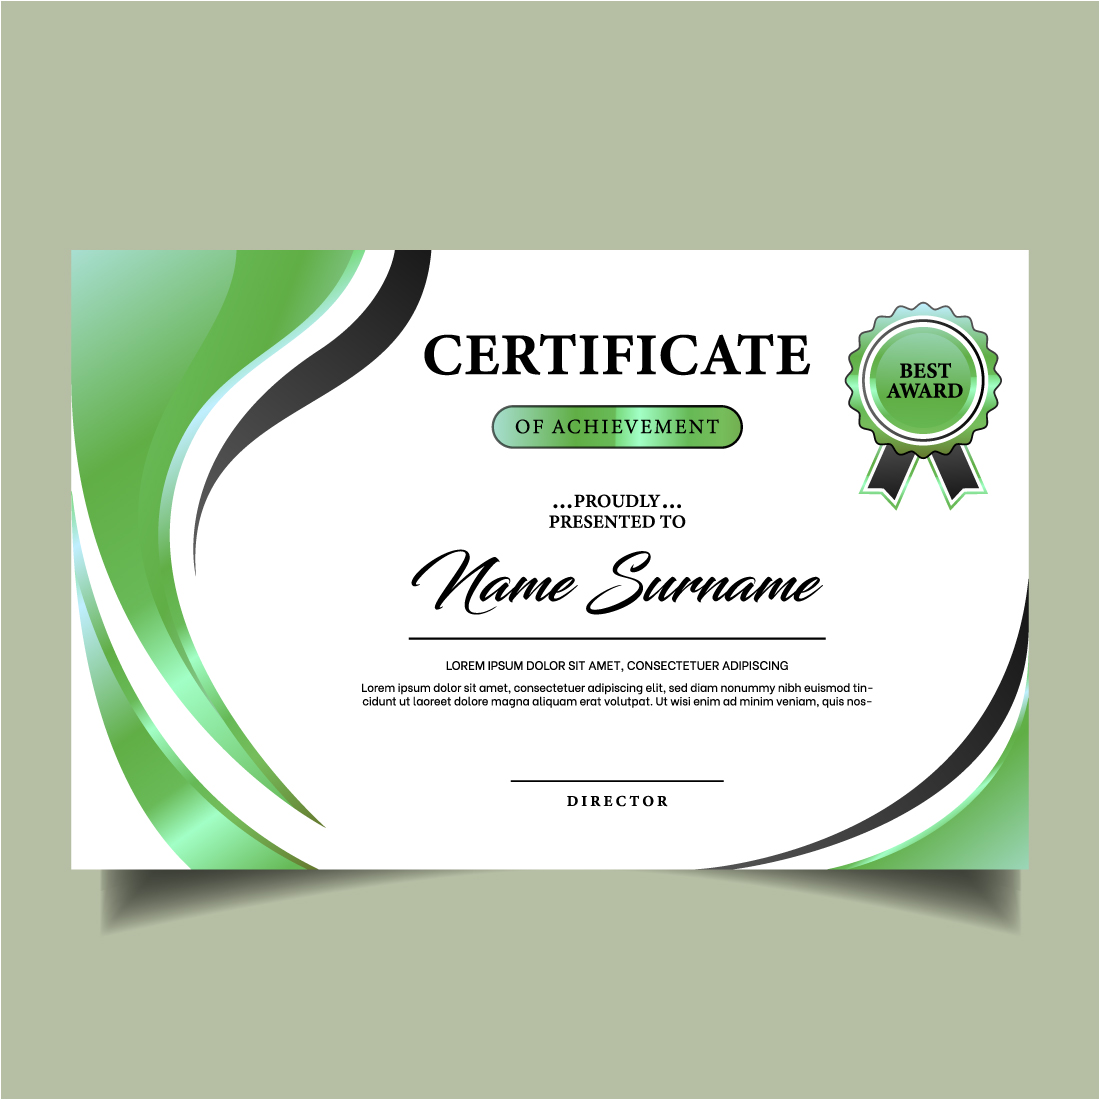 Modern and Luxurious Certificate Design Template previews.